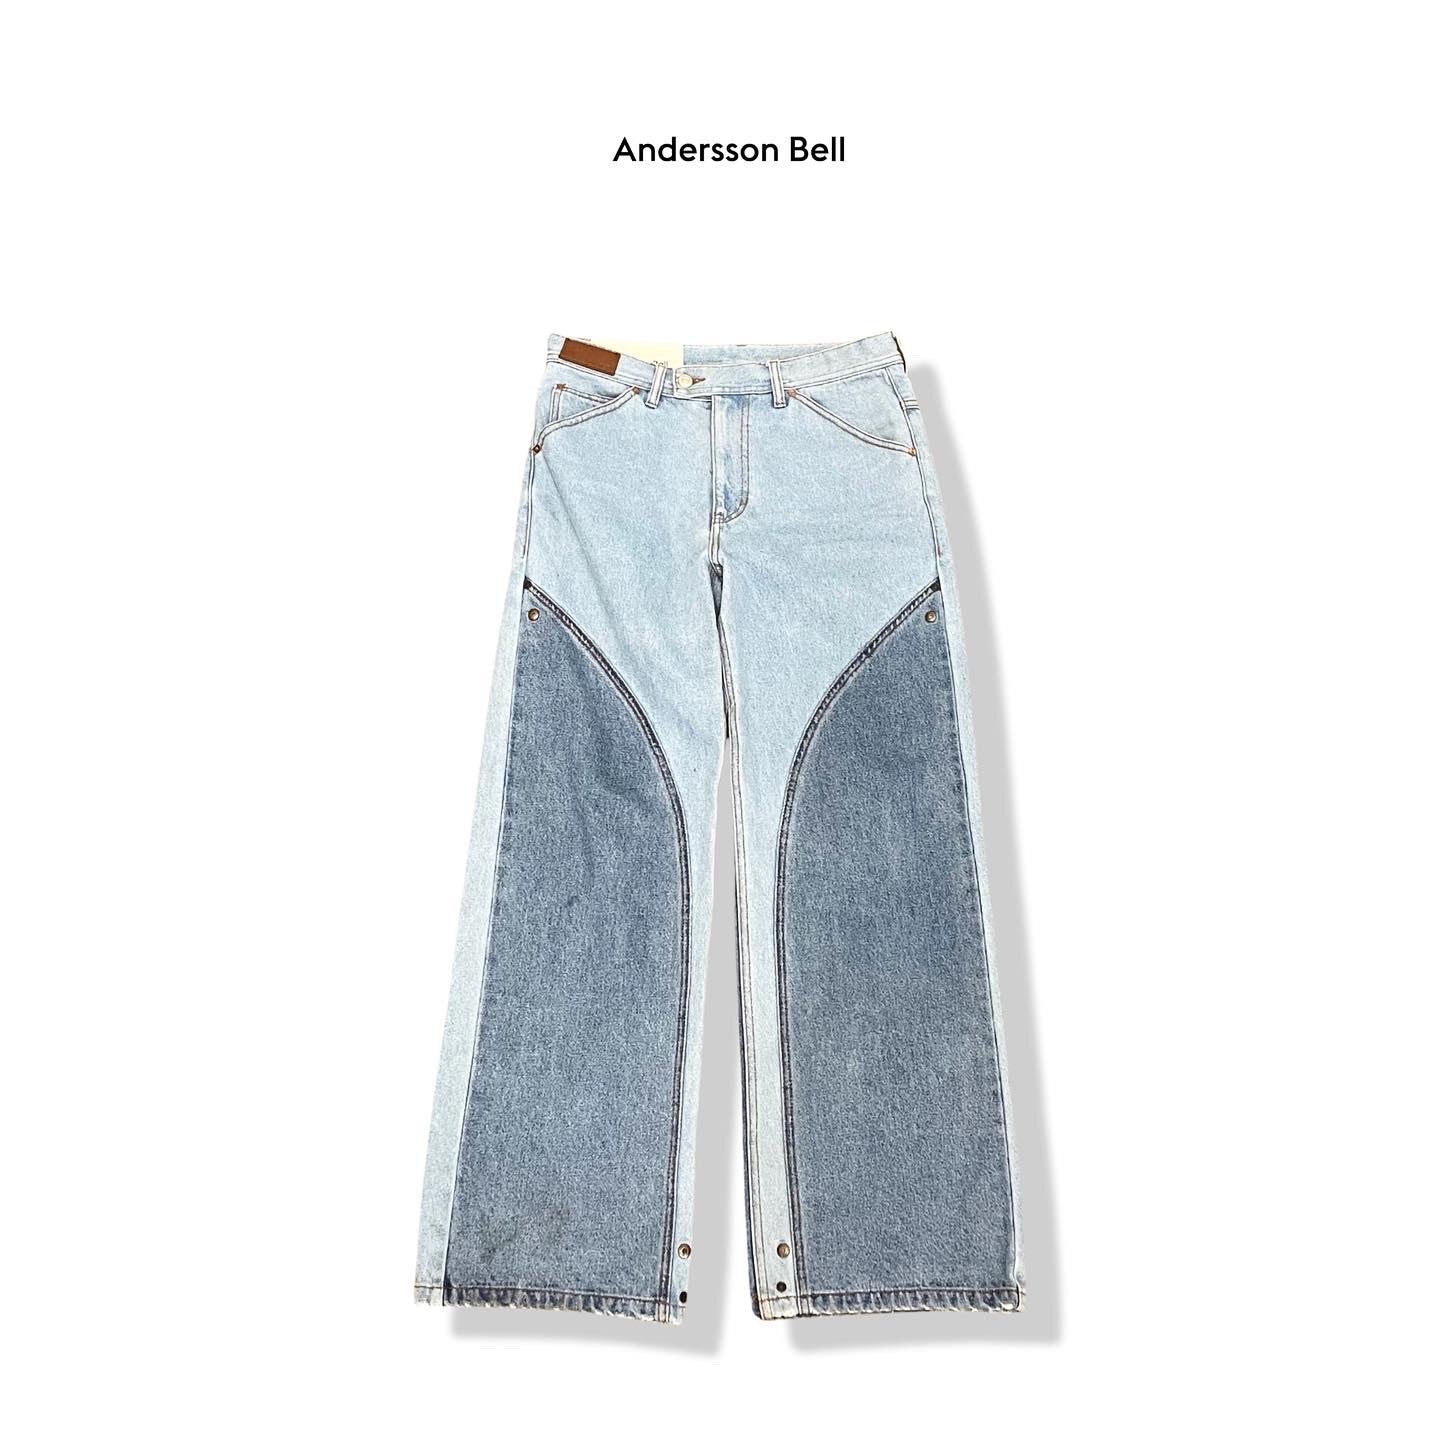 Andersson Bell jeans